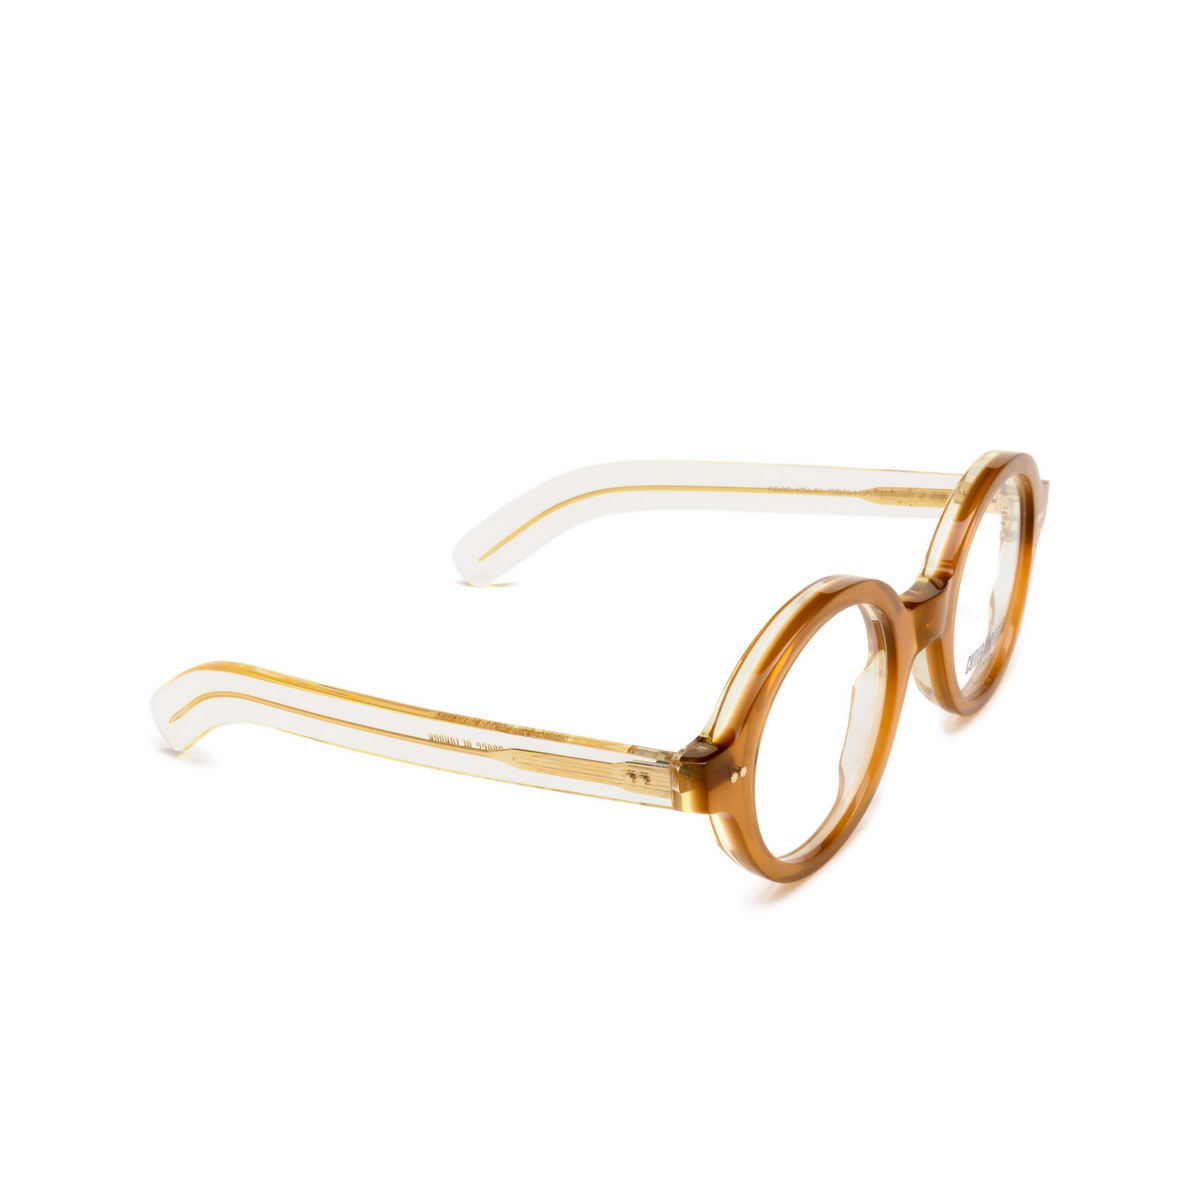 Cutler and Gross® Round Eyeglasses: 1396 color 04 Bi-layer Butterscotch - three-quarters view